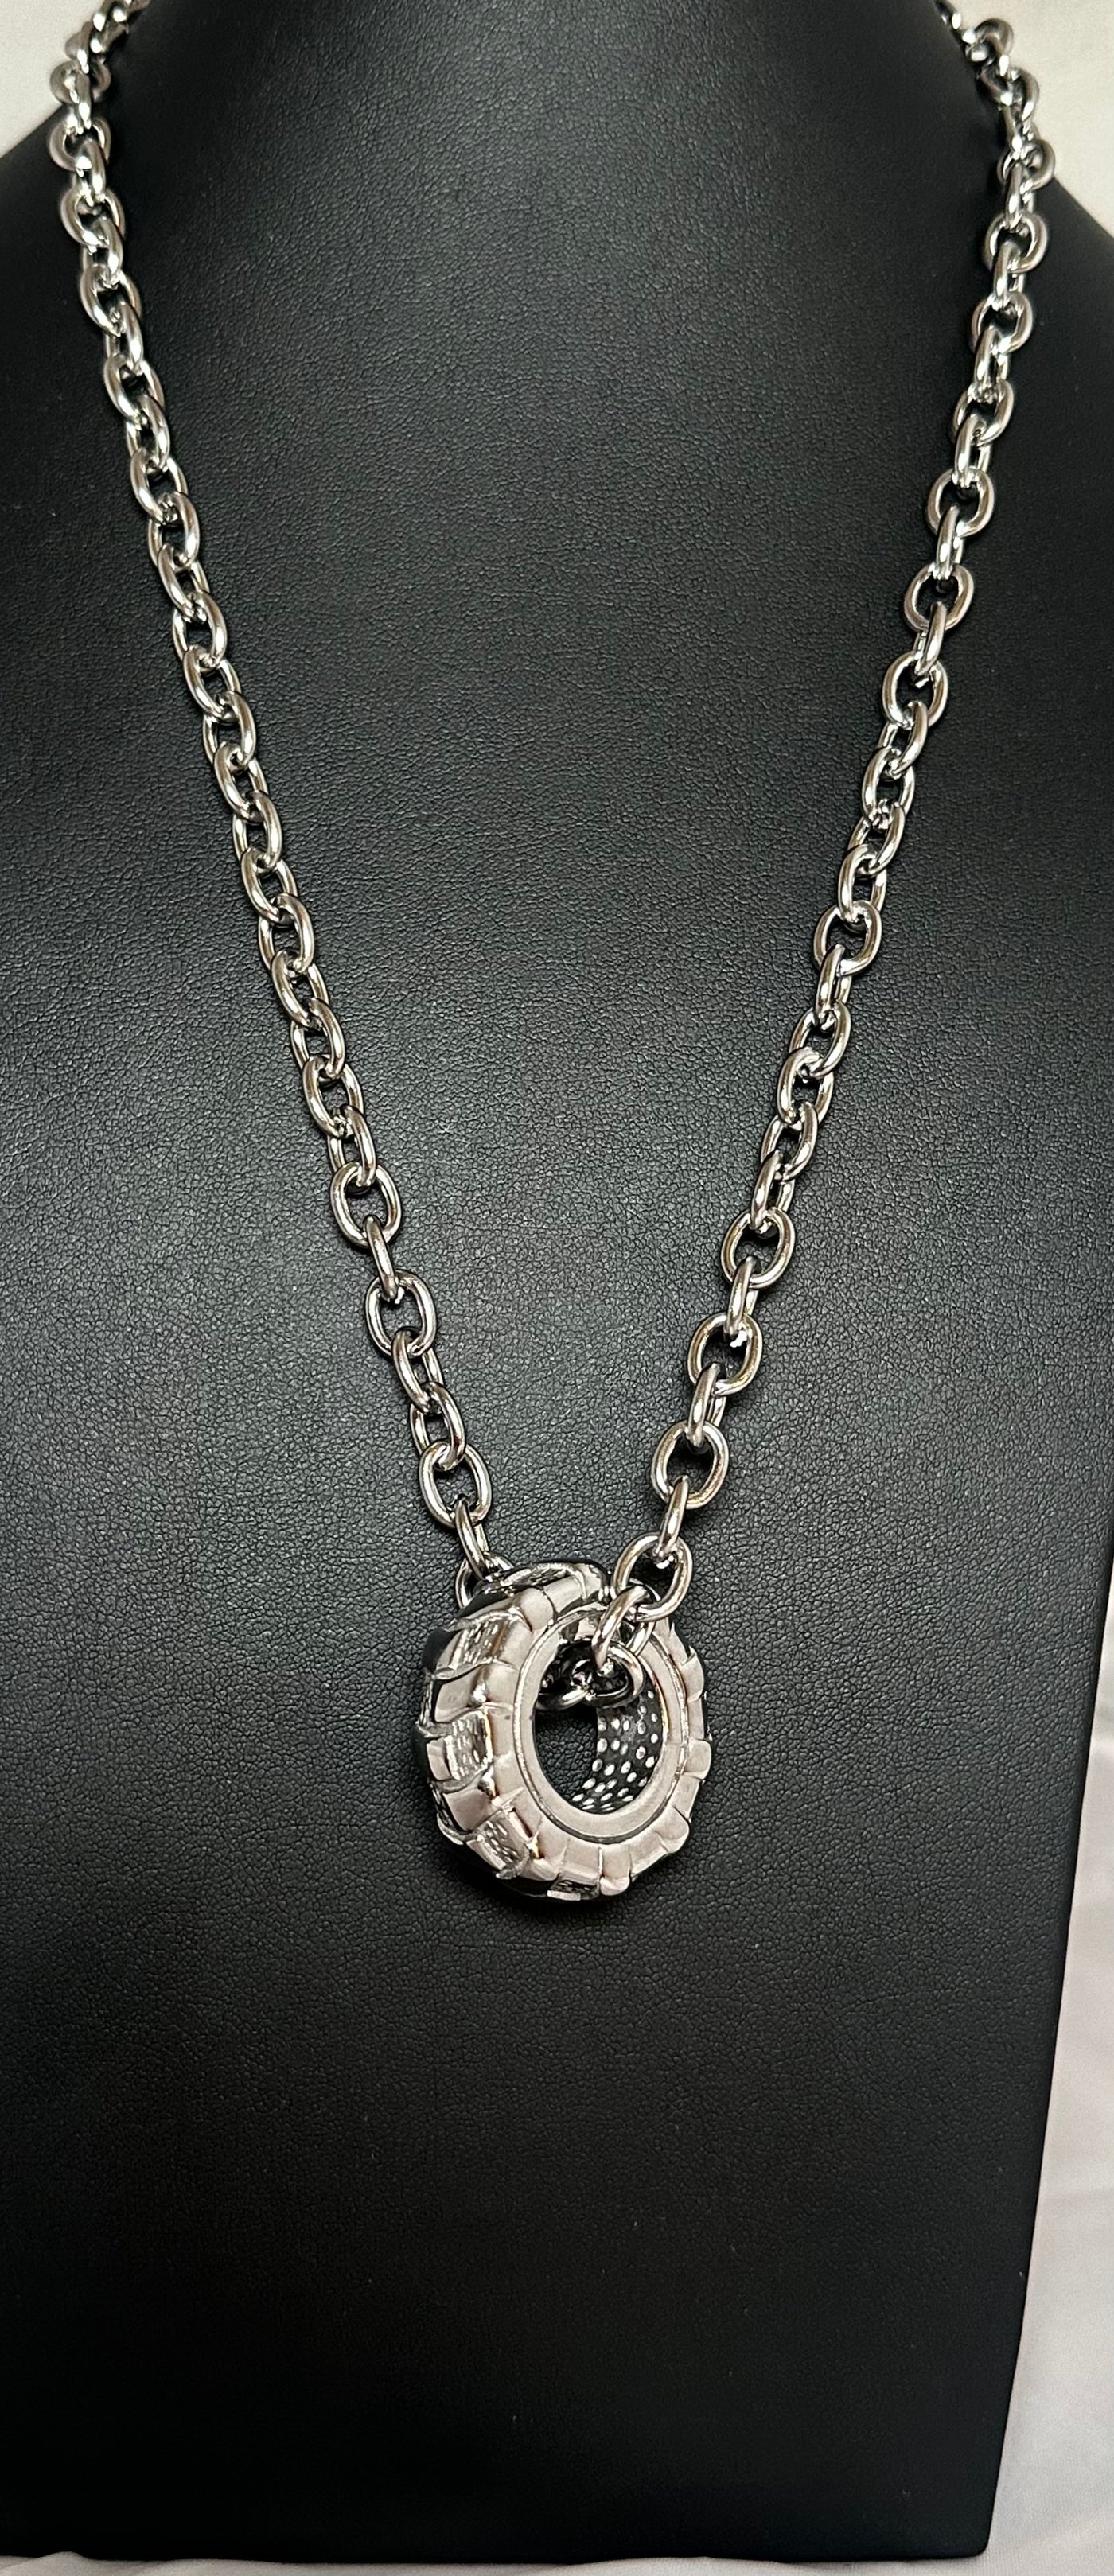 CrossFit Tire Necklace - Brent's Bling